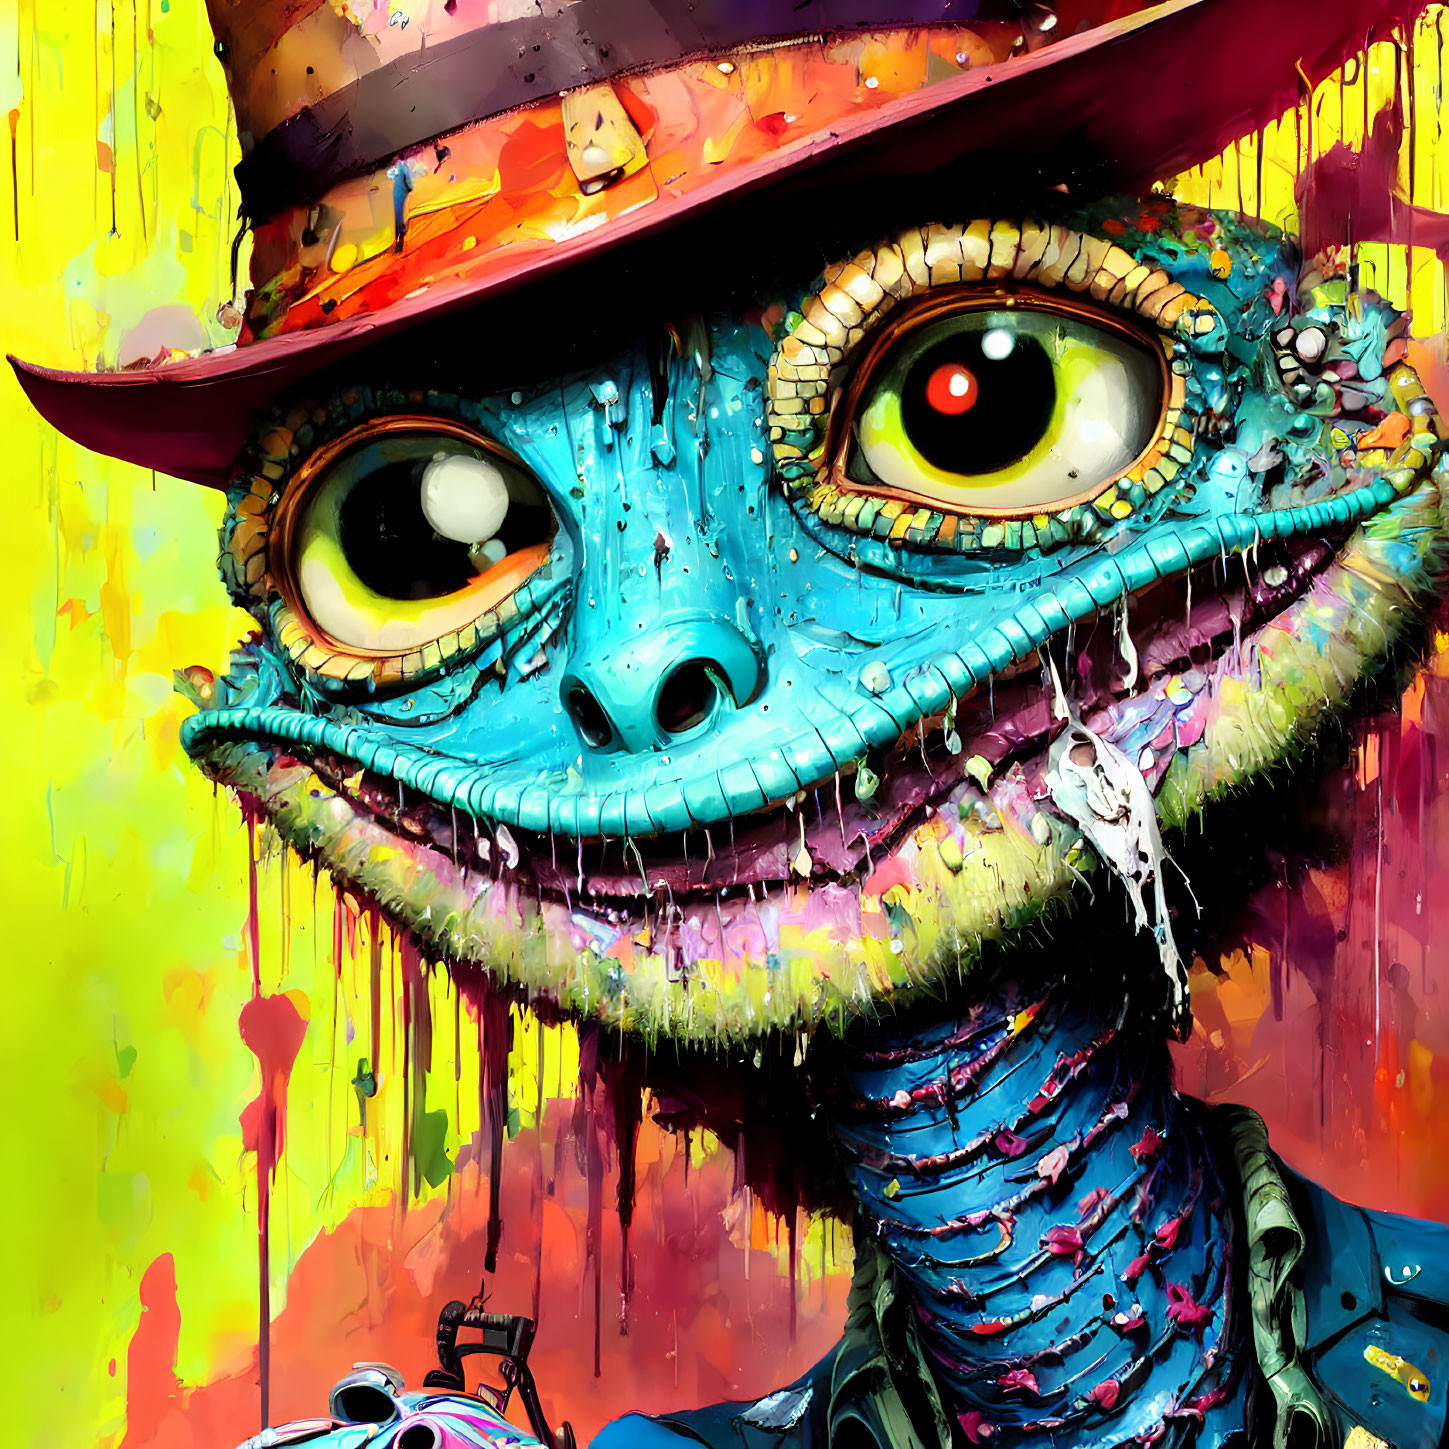 Whimsical anthropomorphic lizard with hat in vibrant colors